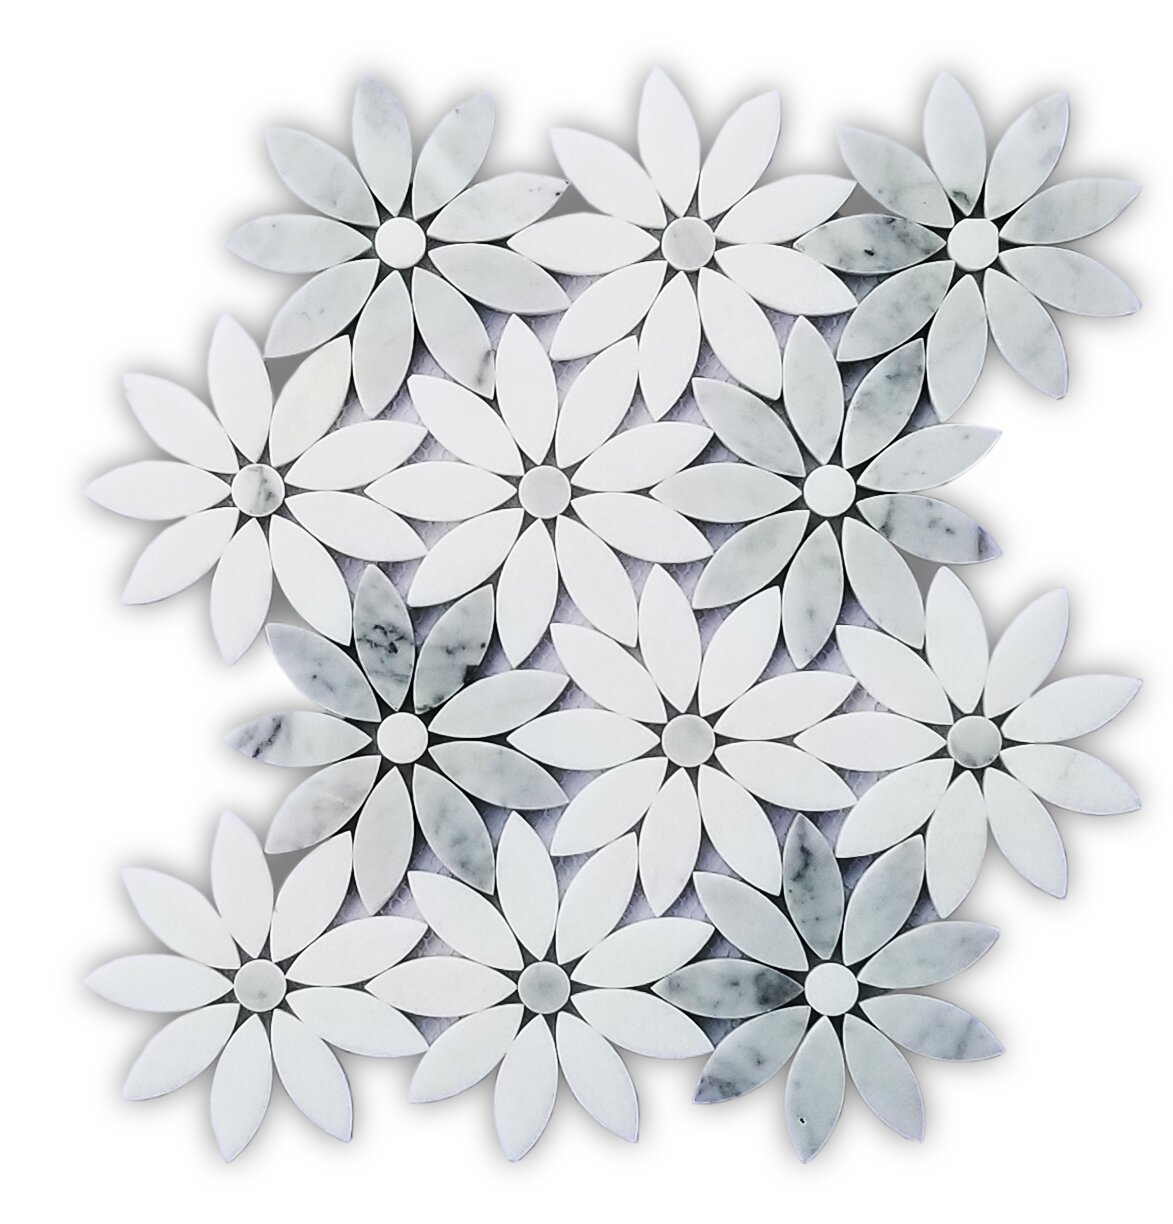 Flower Mosaic Tiles - Lily 10